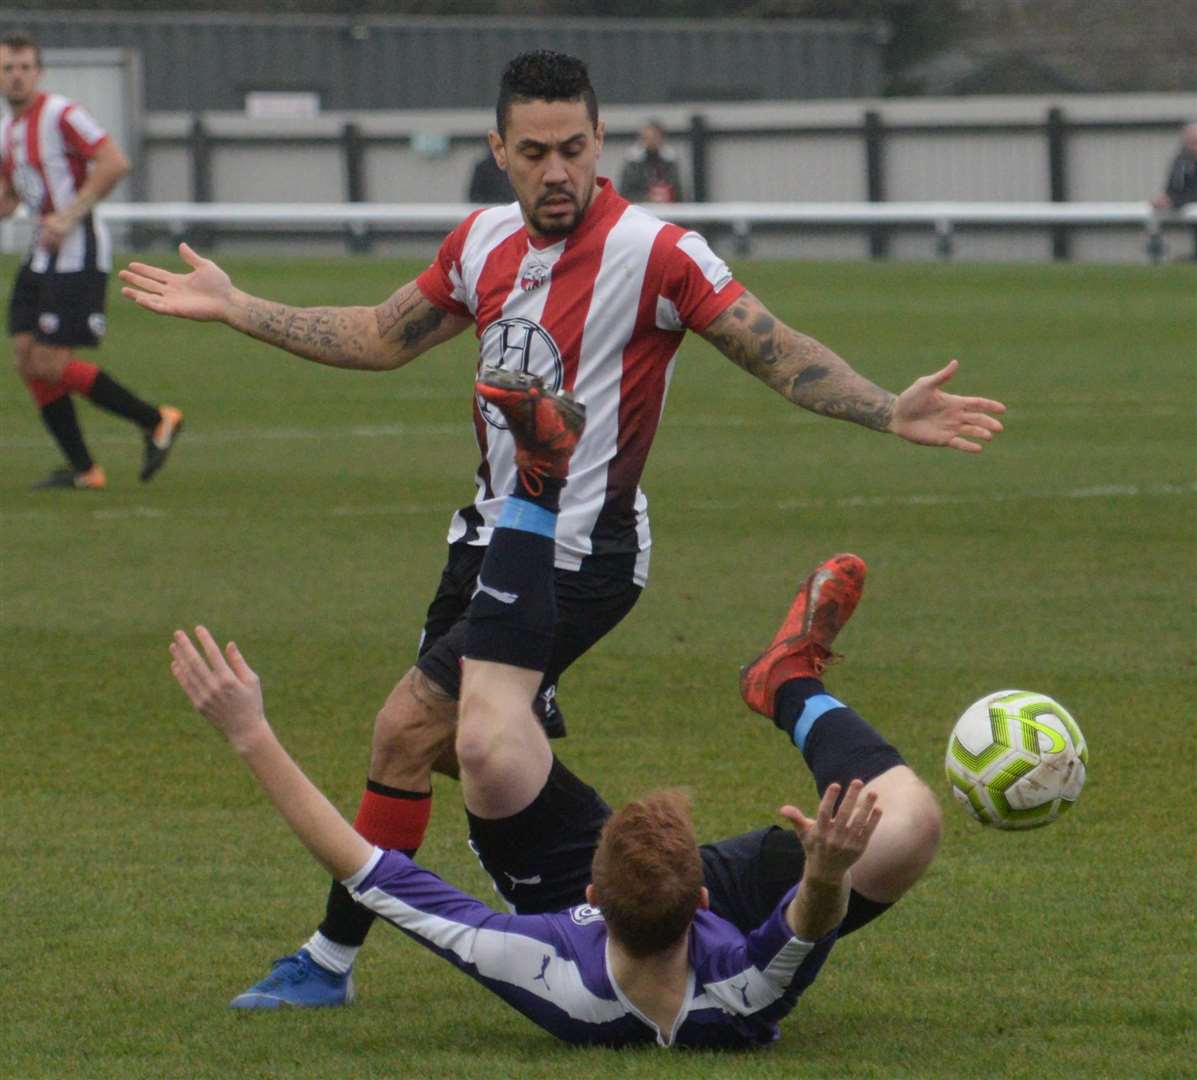 Sheppey United made light work of Punjab United last weekend, winning 5-0 Picture: Chris Davey